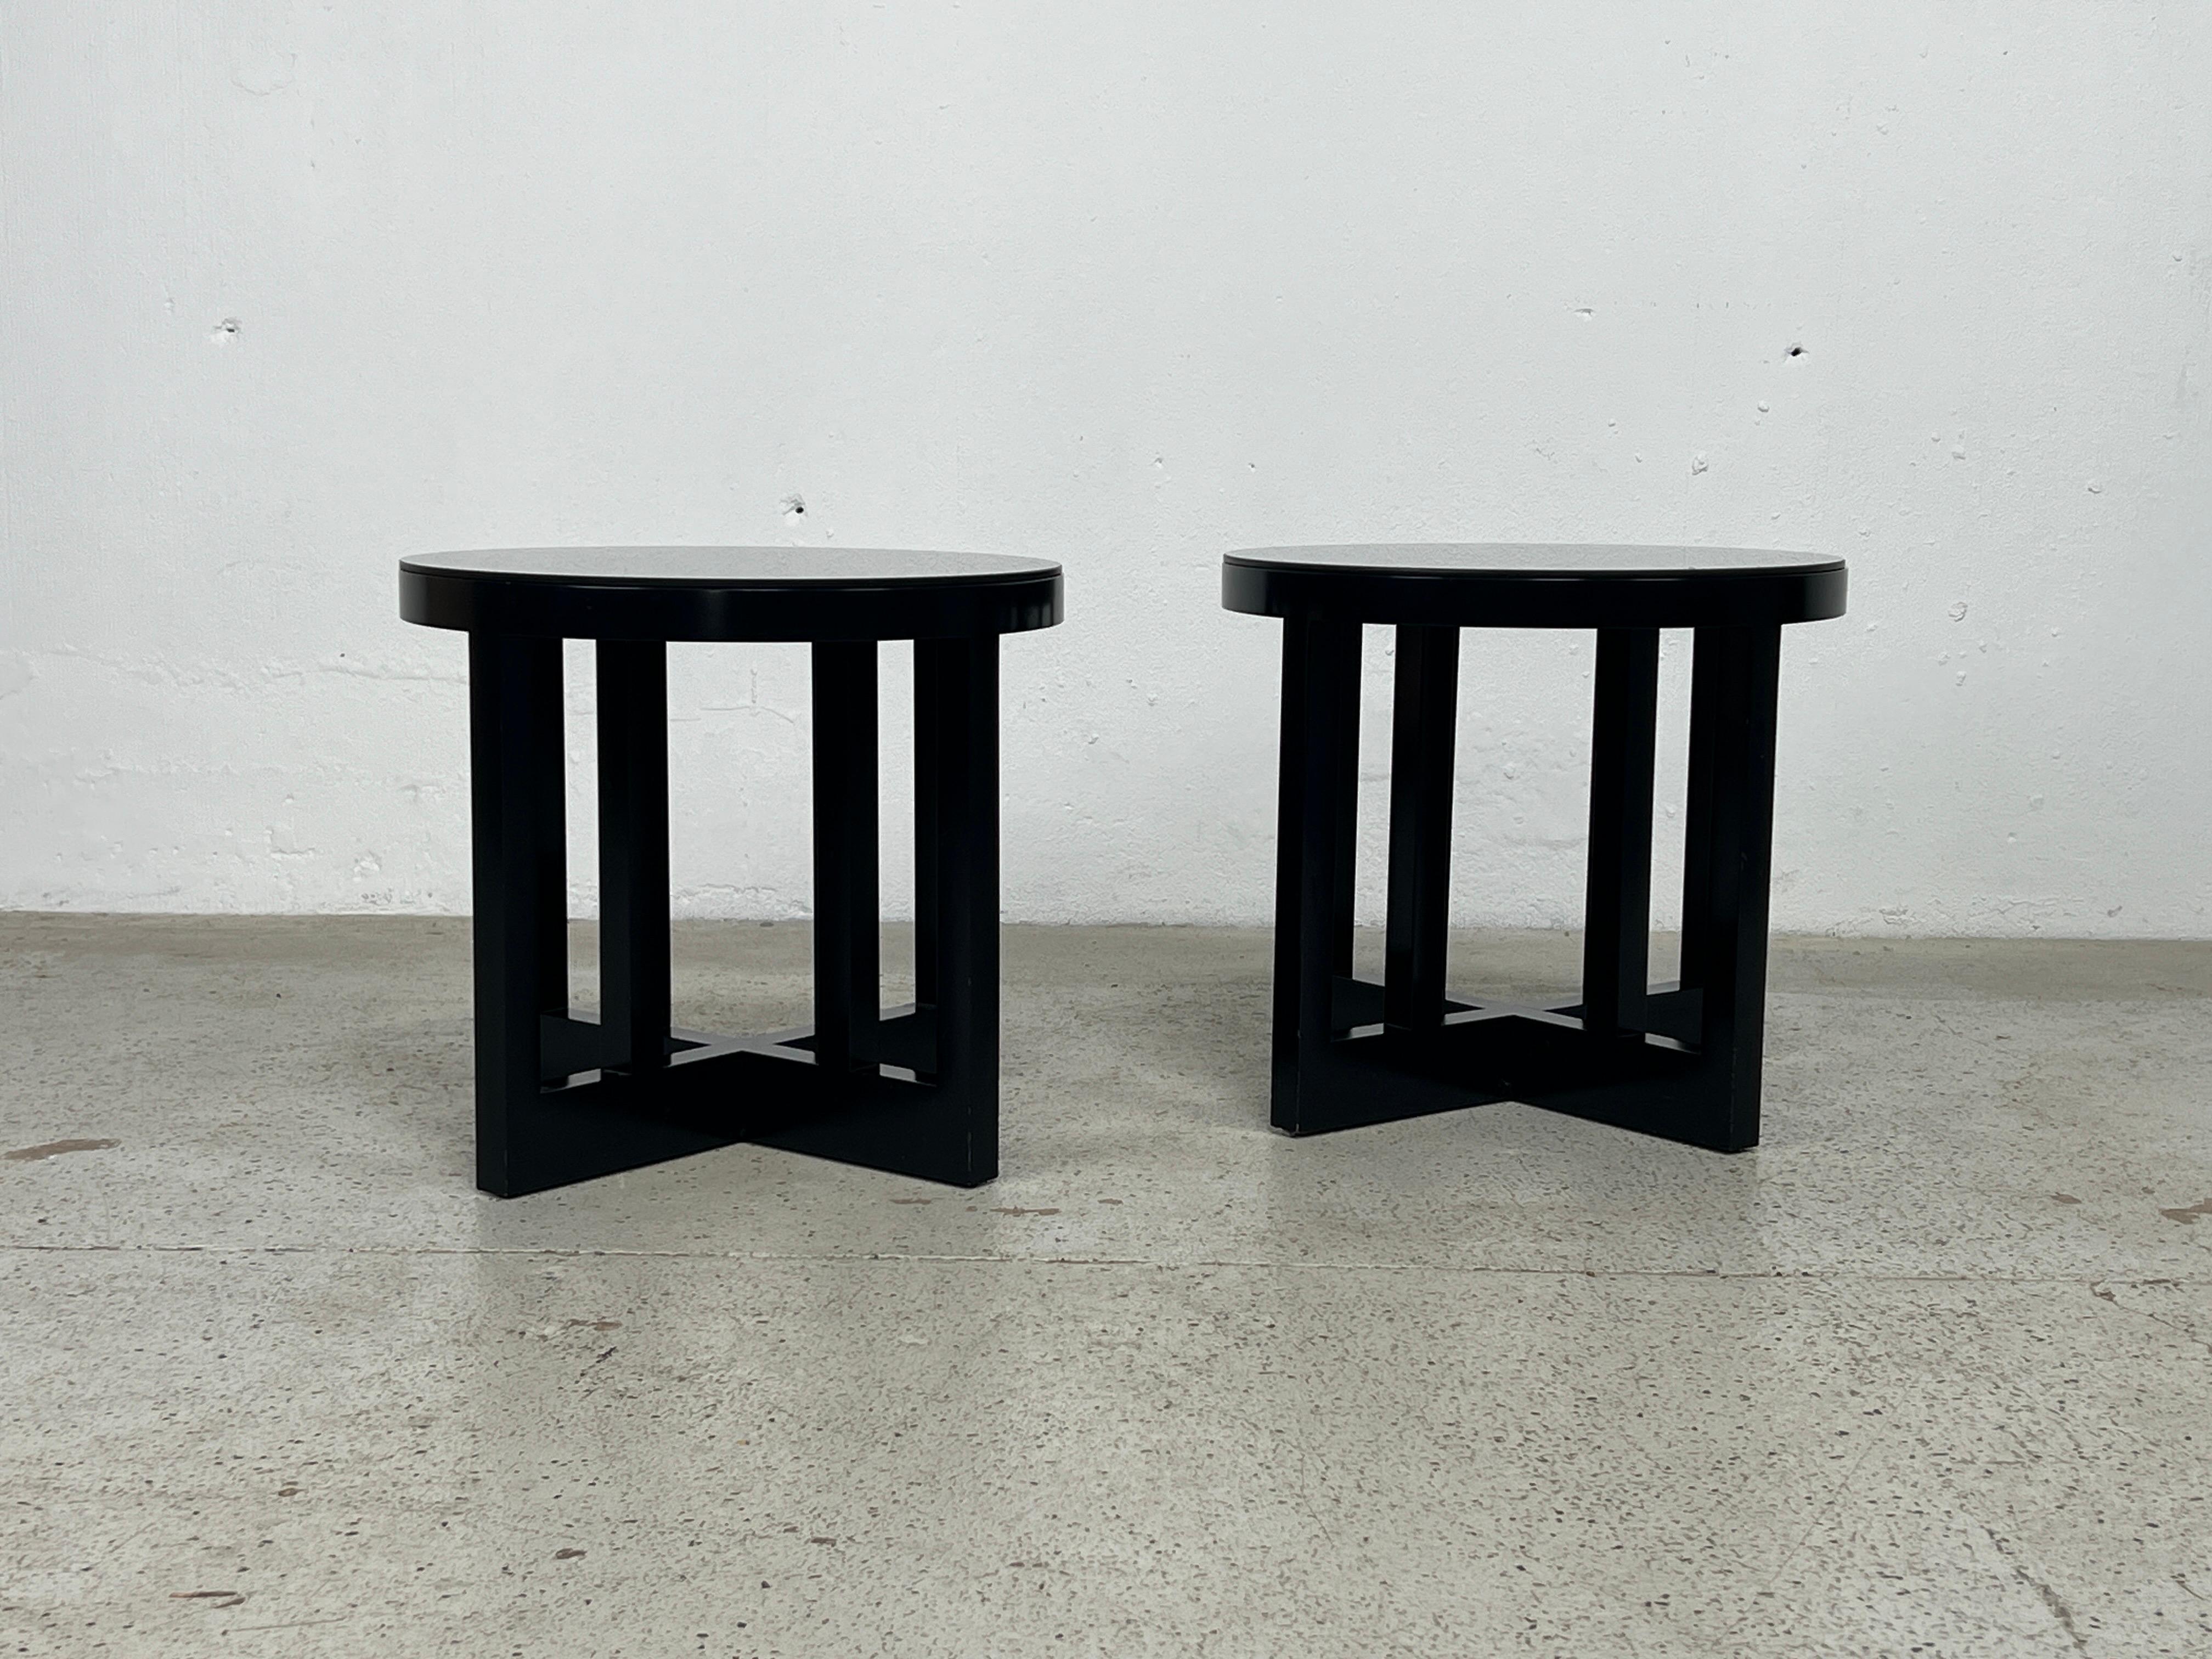 A pair of black lacquered stools designed by Richard Meier for Knoll, 1982. Original condition with custom black glass tops. 